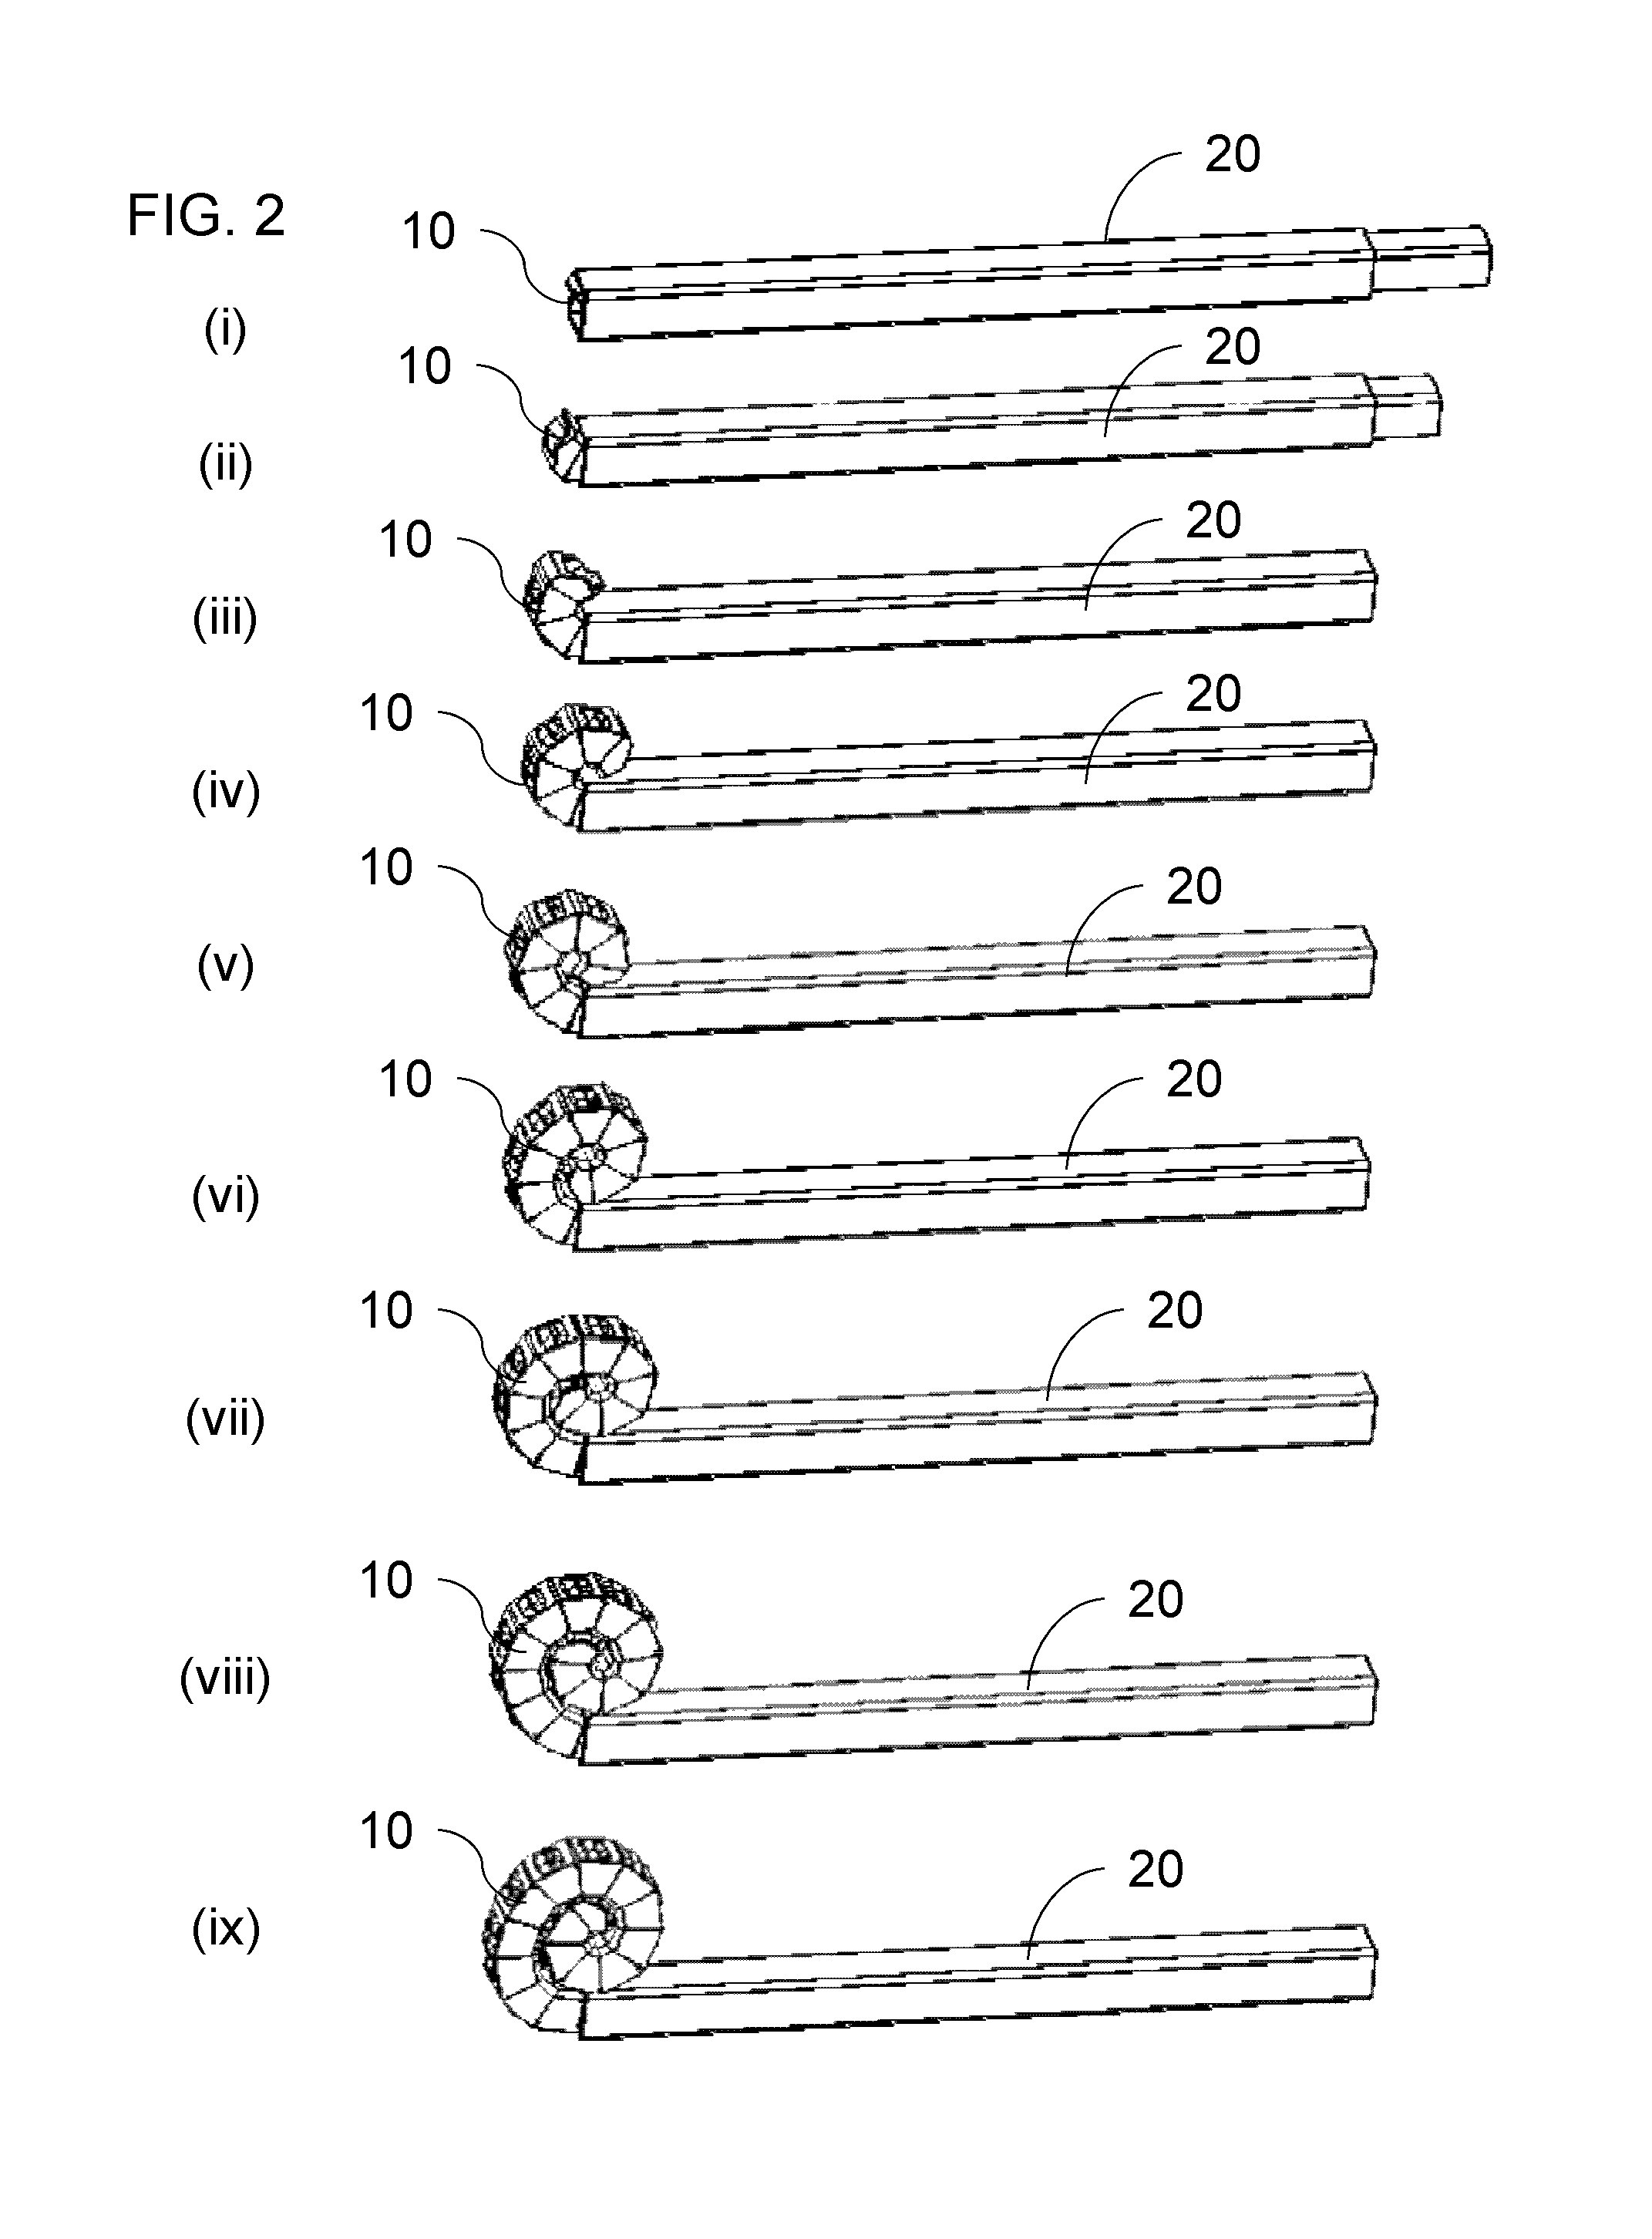 Tool and corresponding method for removal of material from within a body